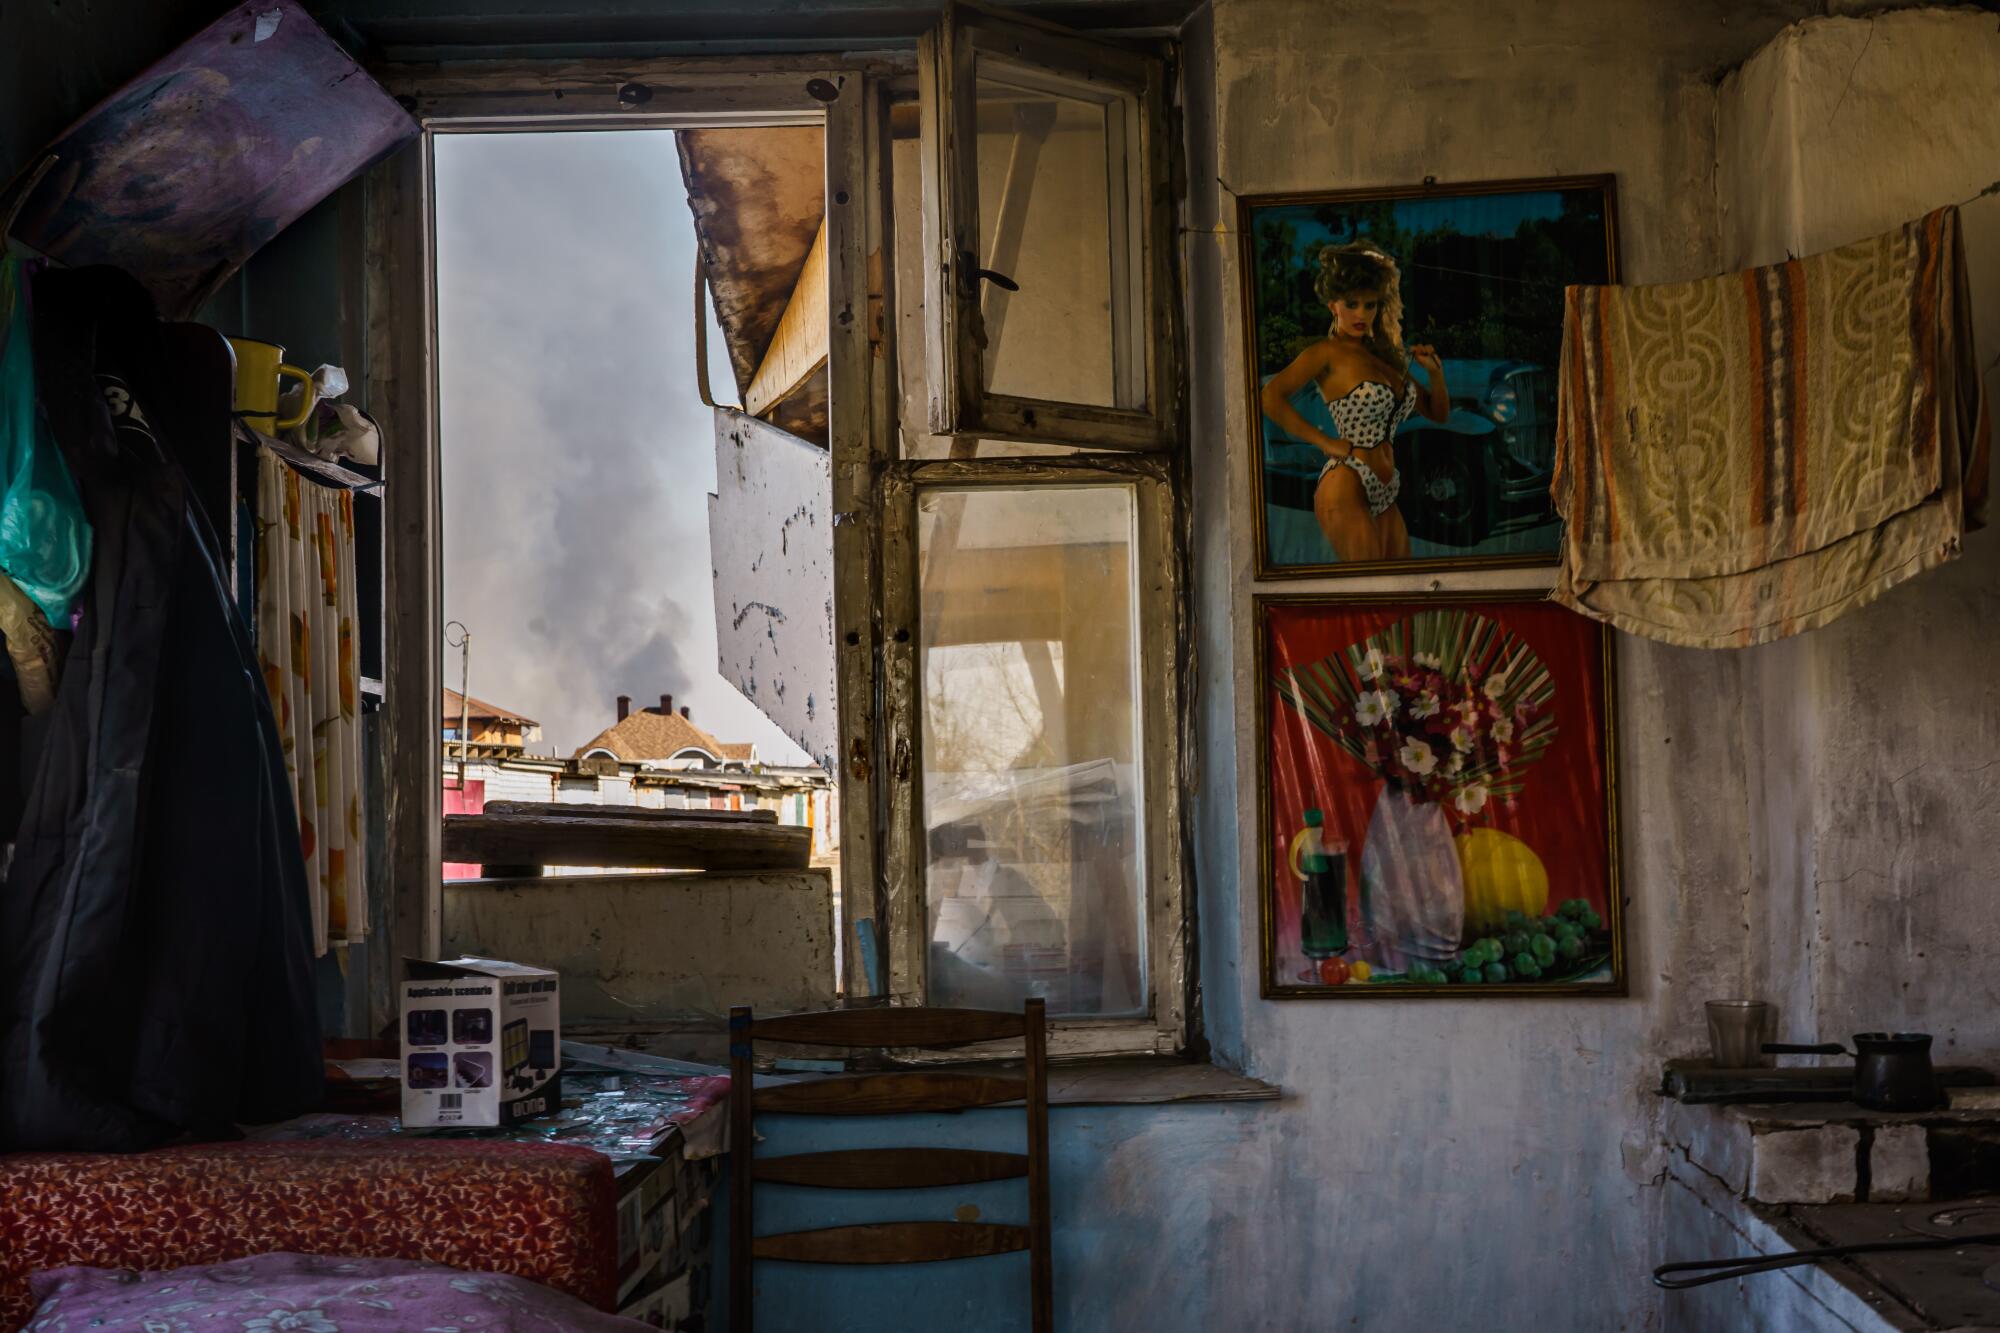 The inside of a room with a pinup girl poster on the wall and a window open showing smoke rising from a building.